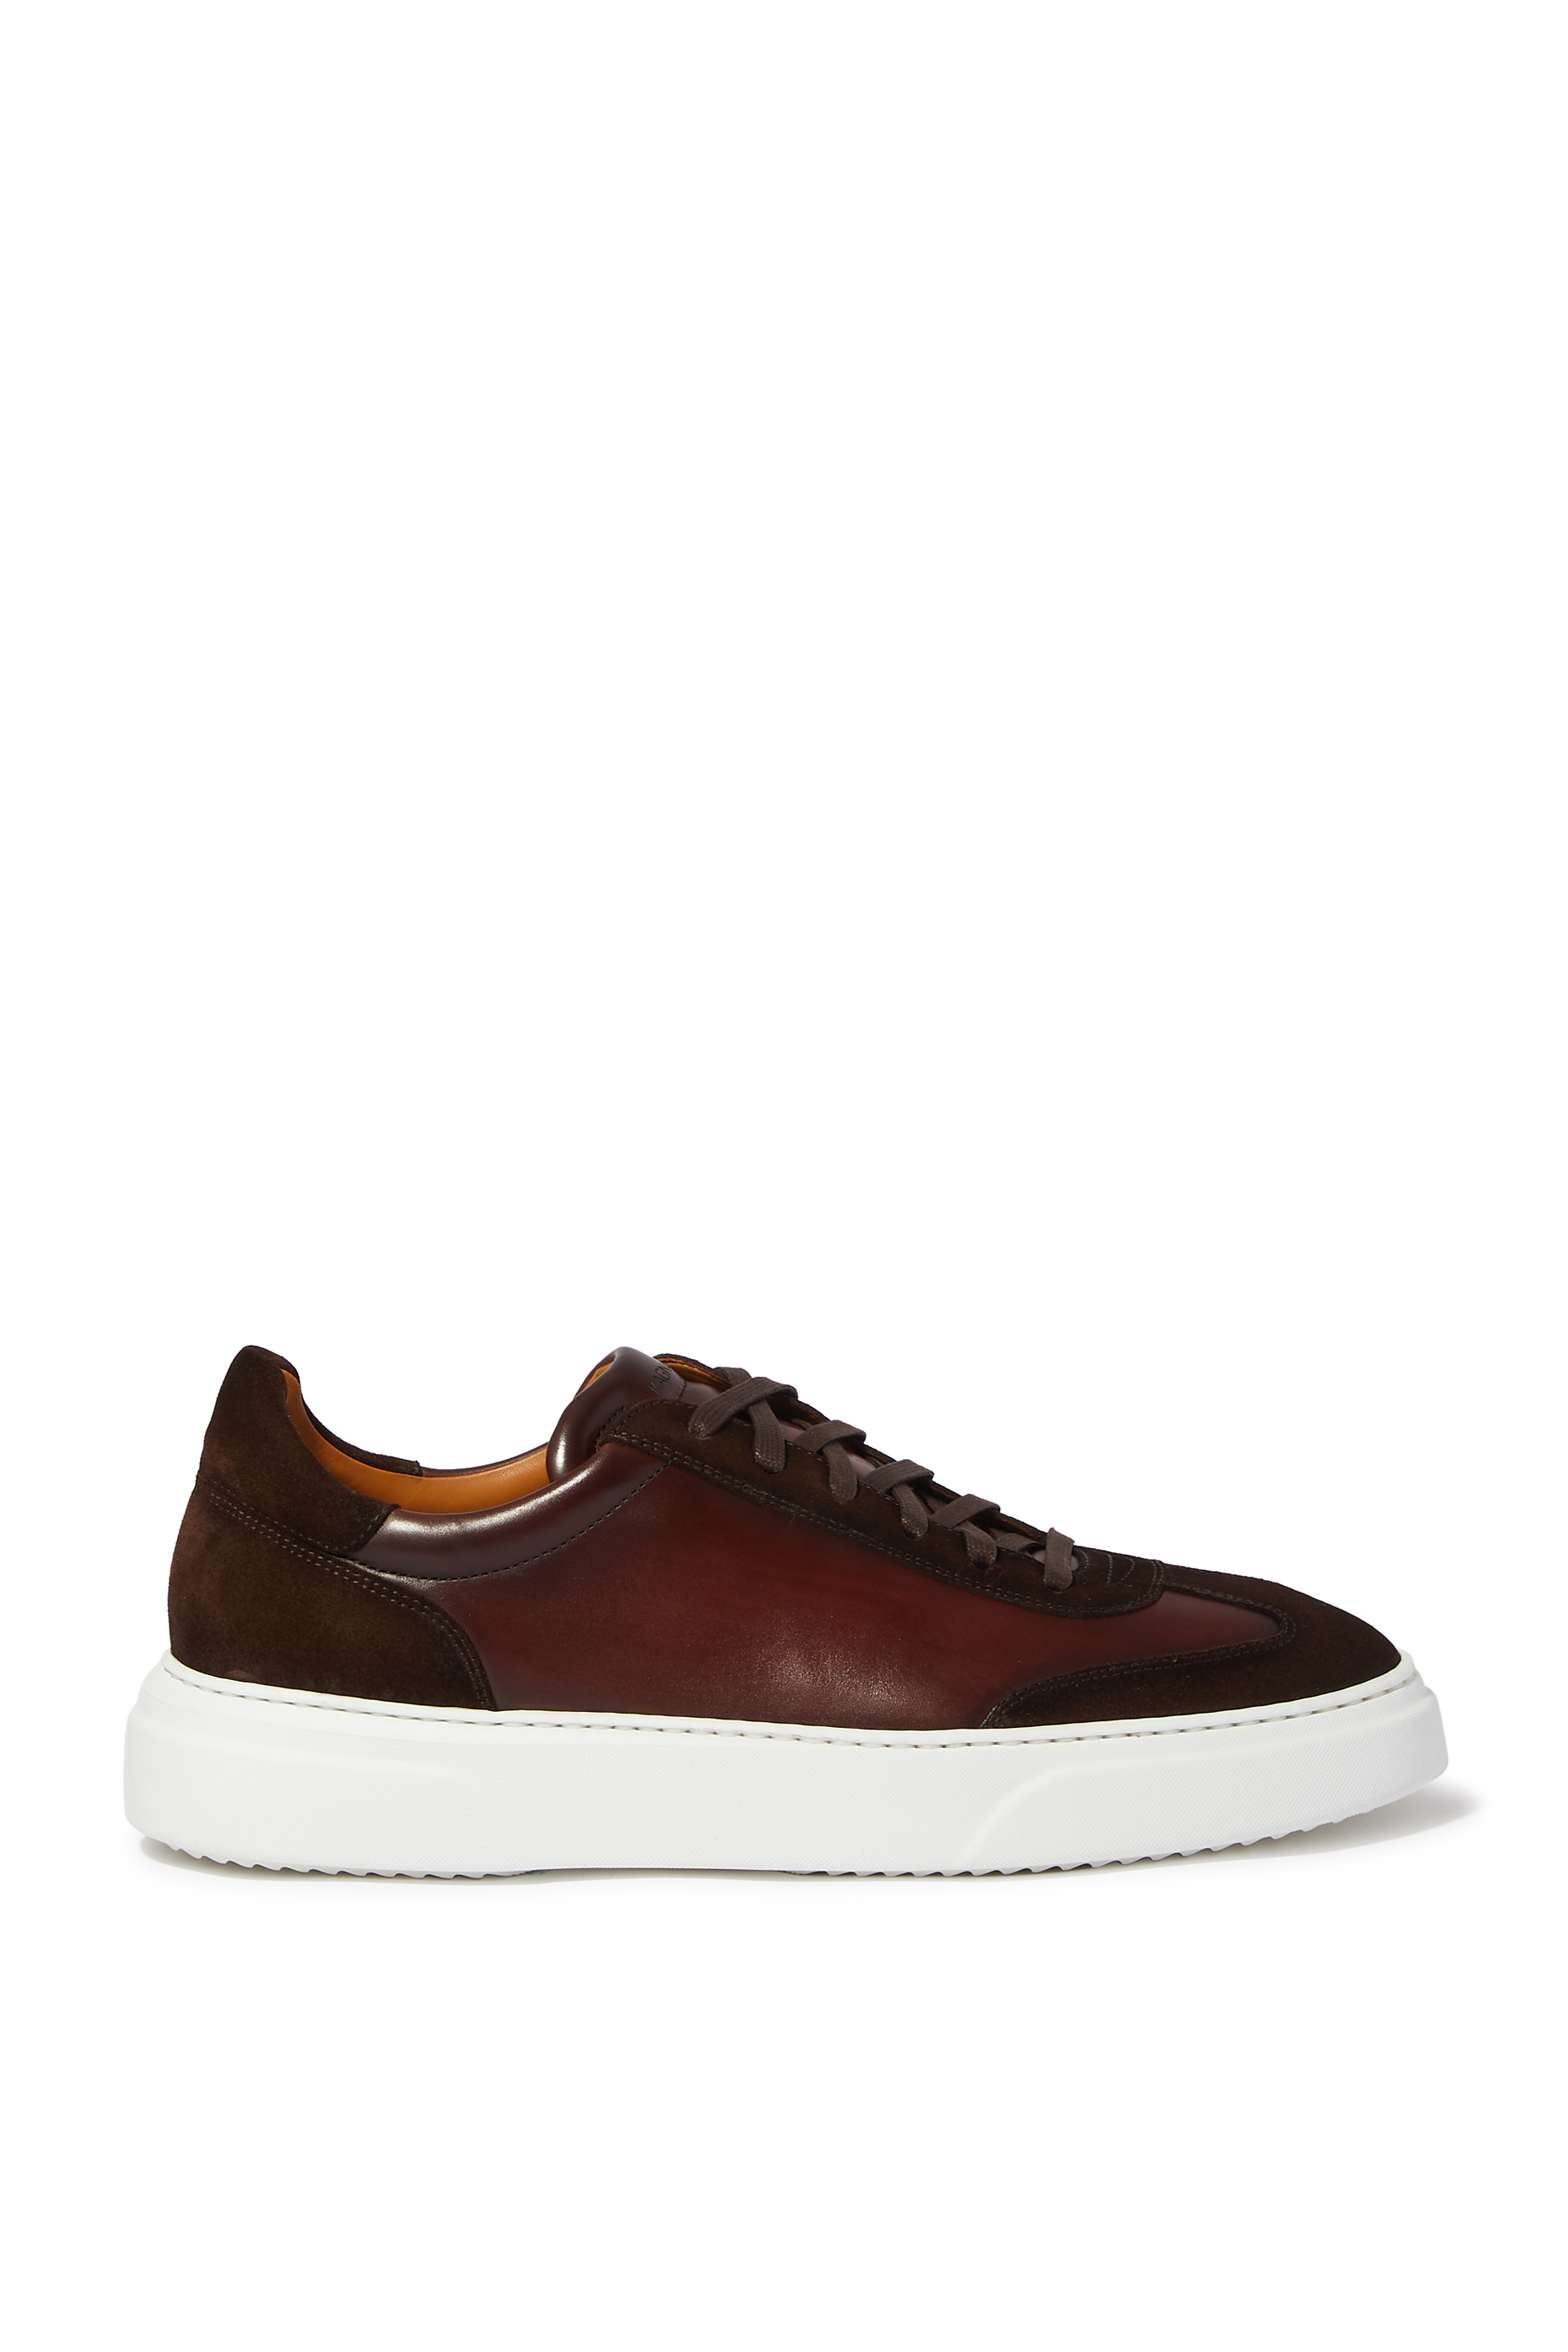 Buy Magnanni Leather Tennis Sneakers for Mens | Bloomingdale's Kuwait